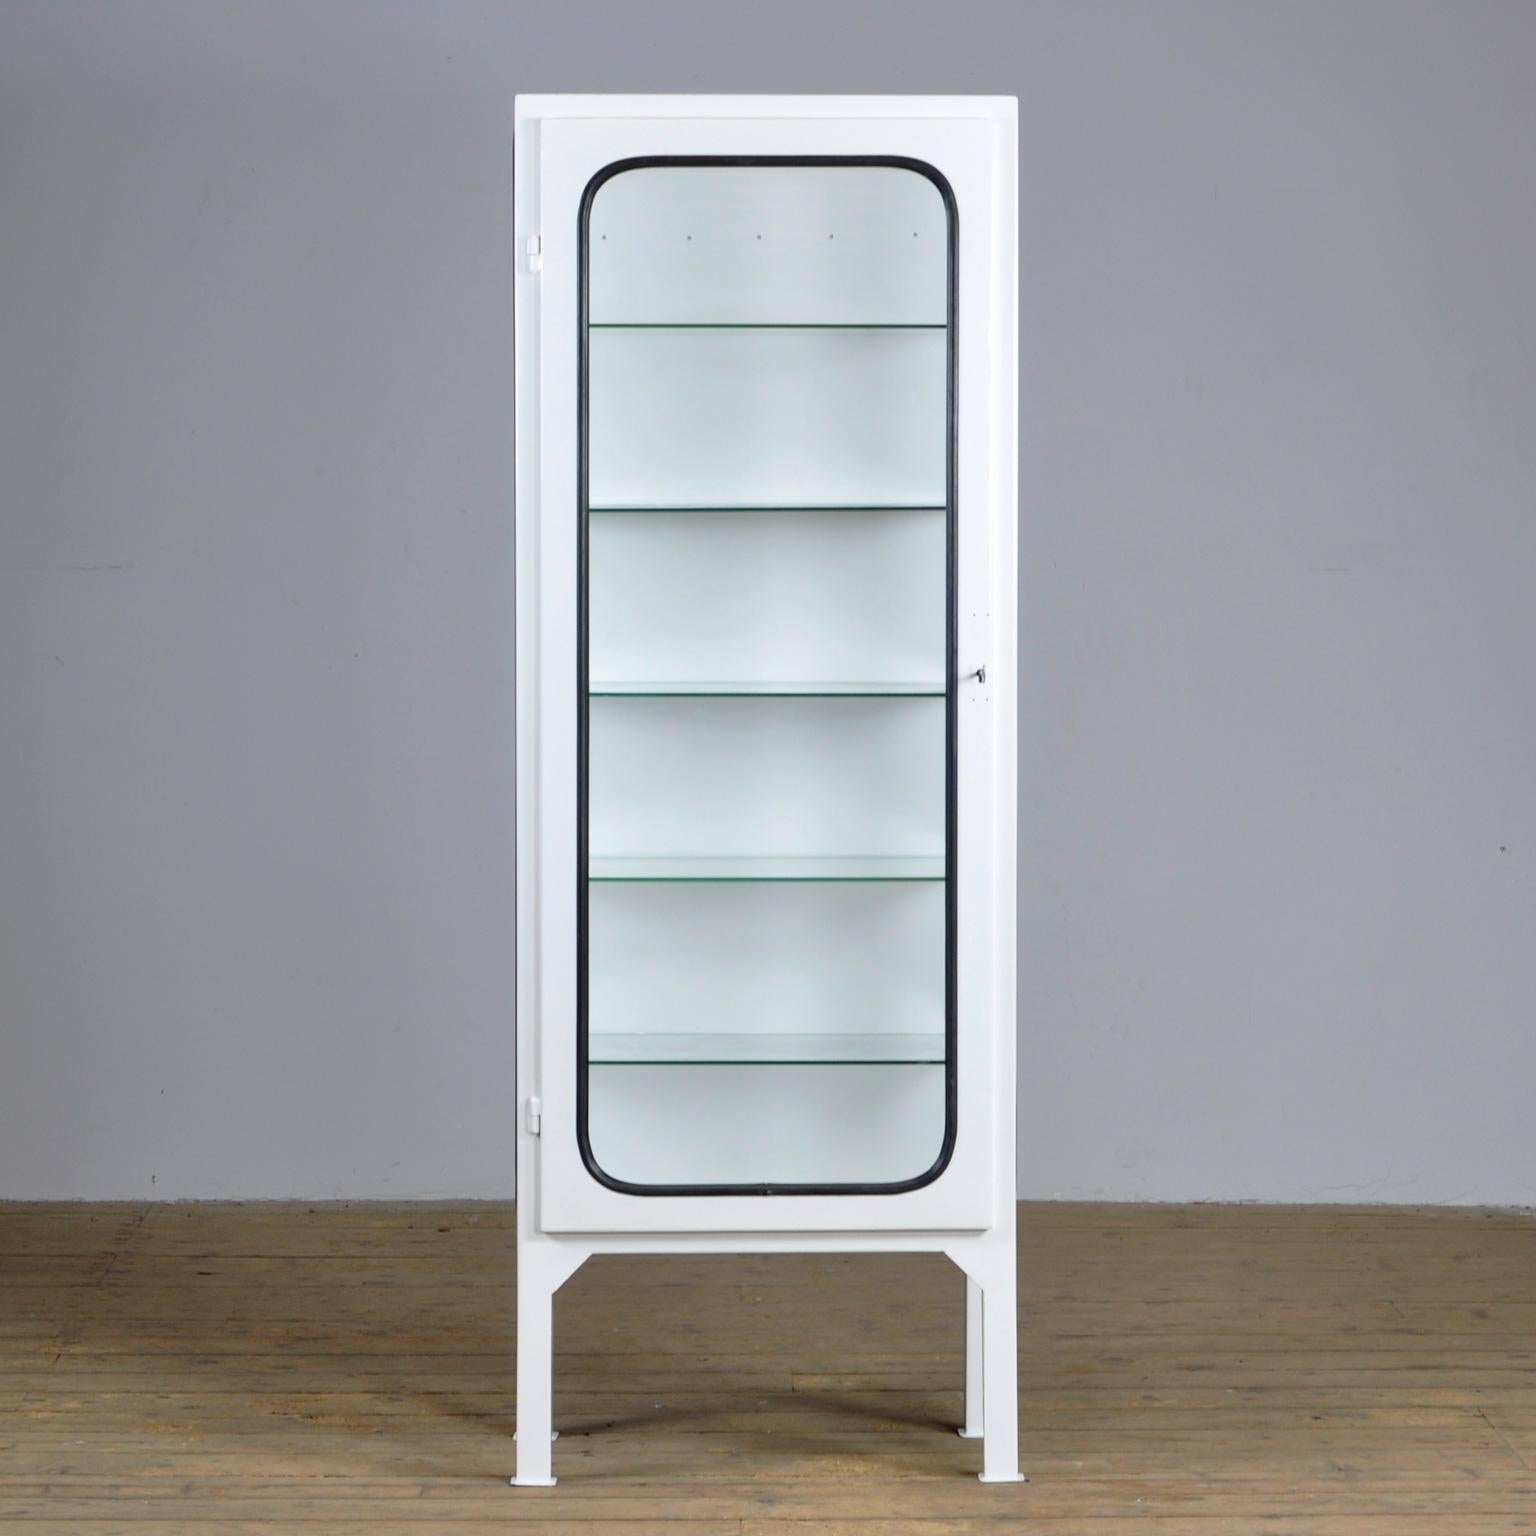 This medicine cabinet was designed in the 1970s and produced in 1975 in Hungary. It is made from steel and antique glass, with the glass panes held in place by a black rubber strip. The cabinet features five adjustable glass shelves and a